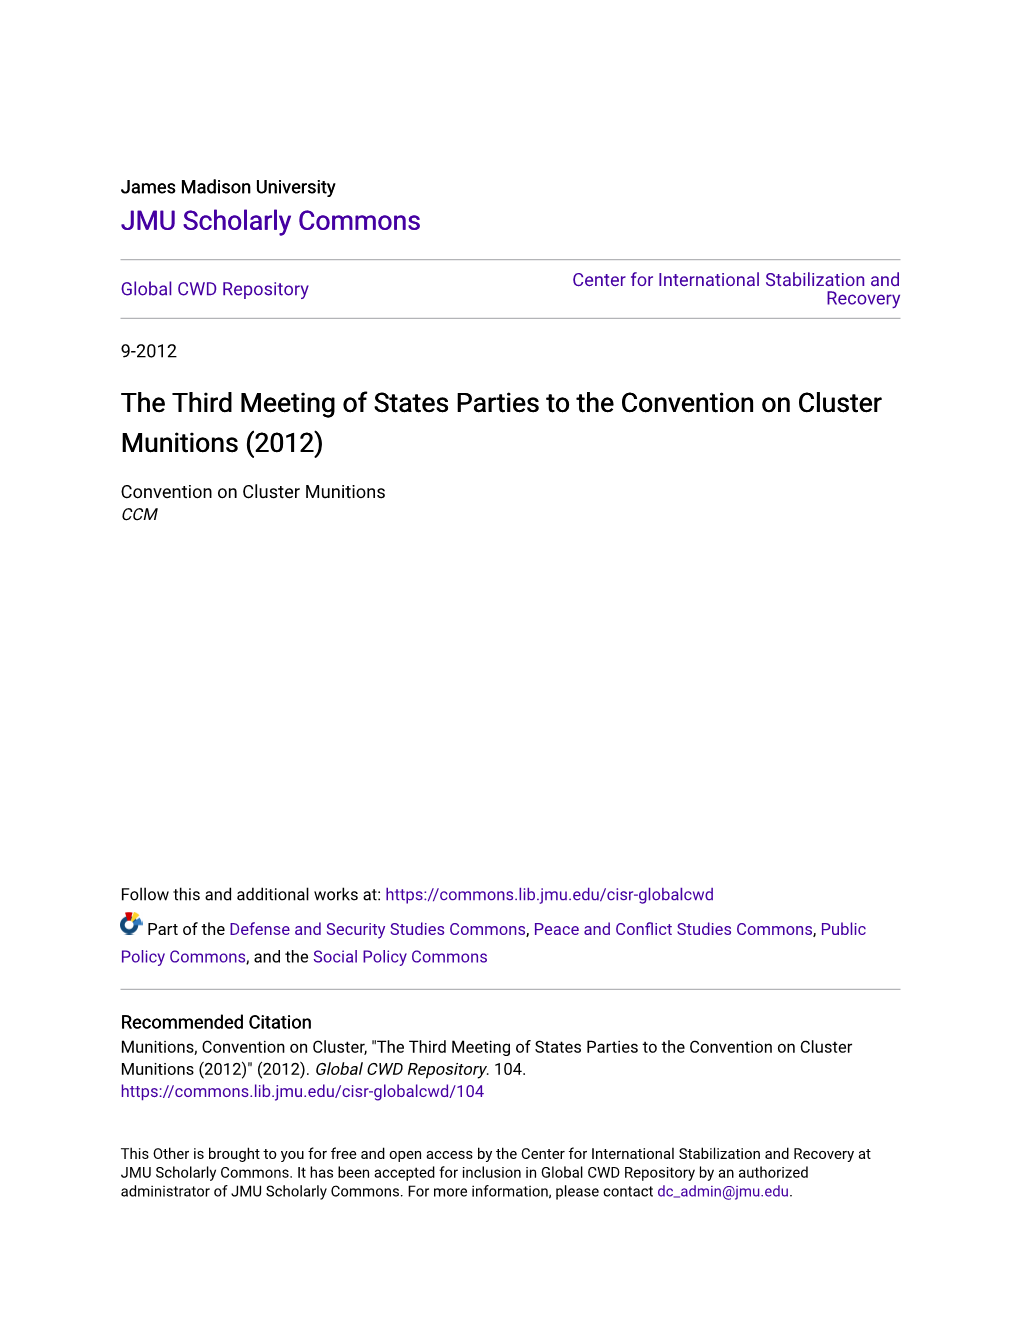 The Third Meeting of States Parties to the Convention on Cluster Munitions (2012)